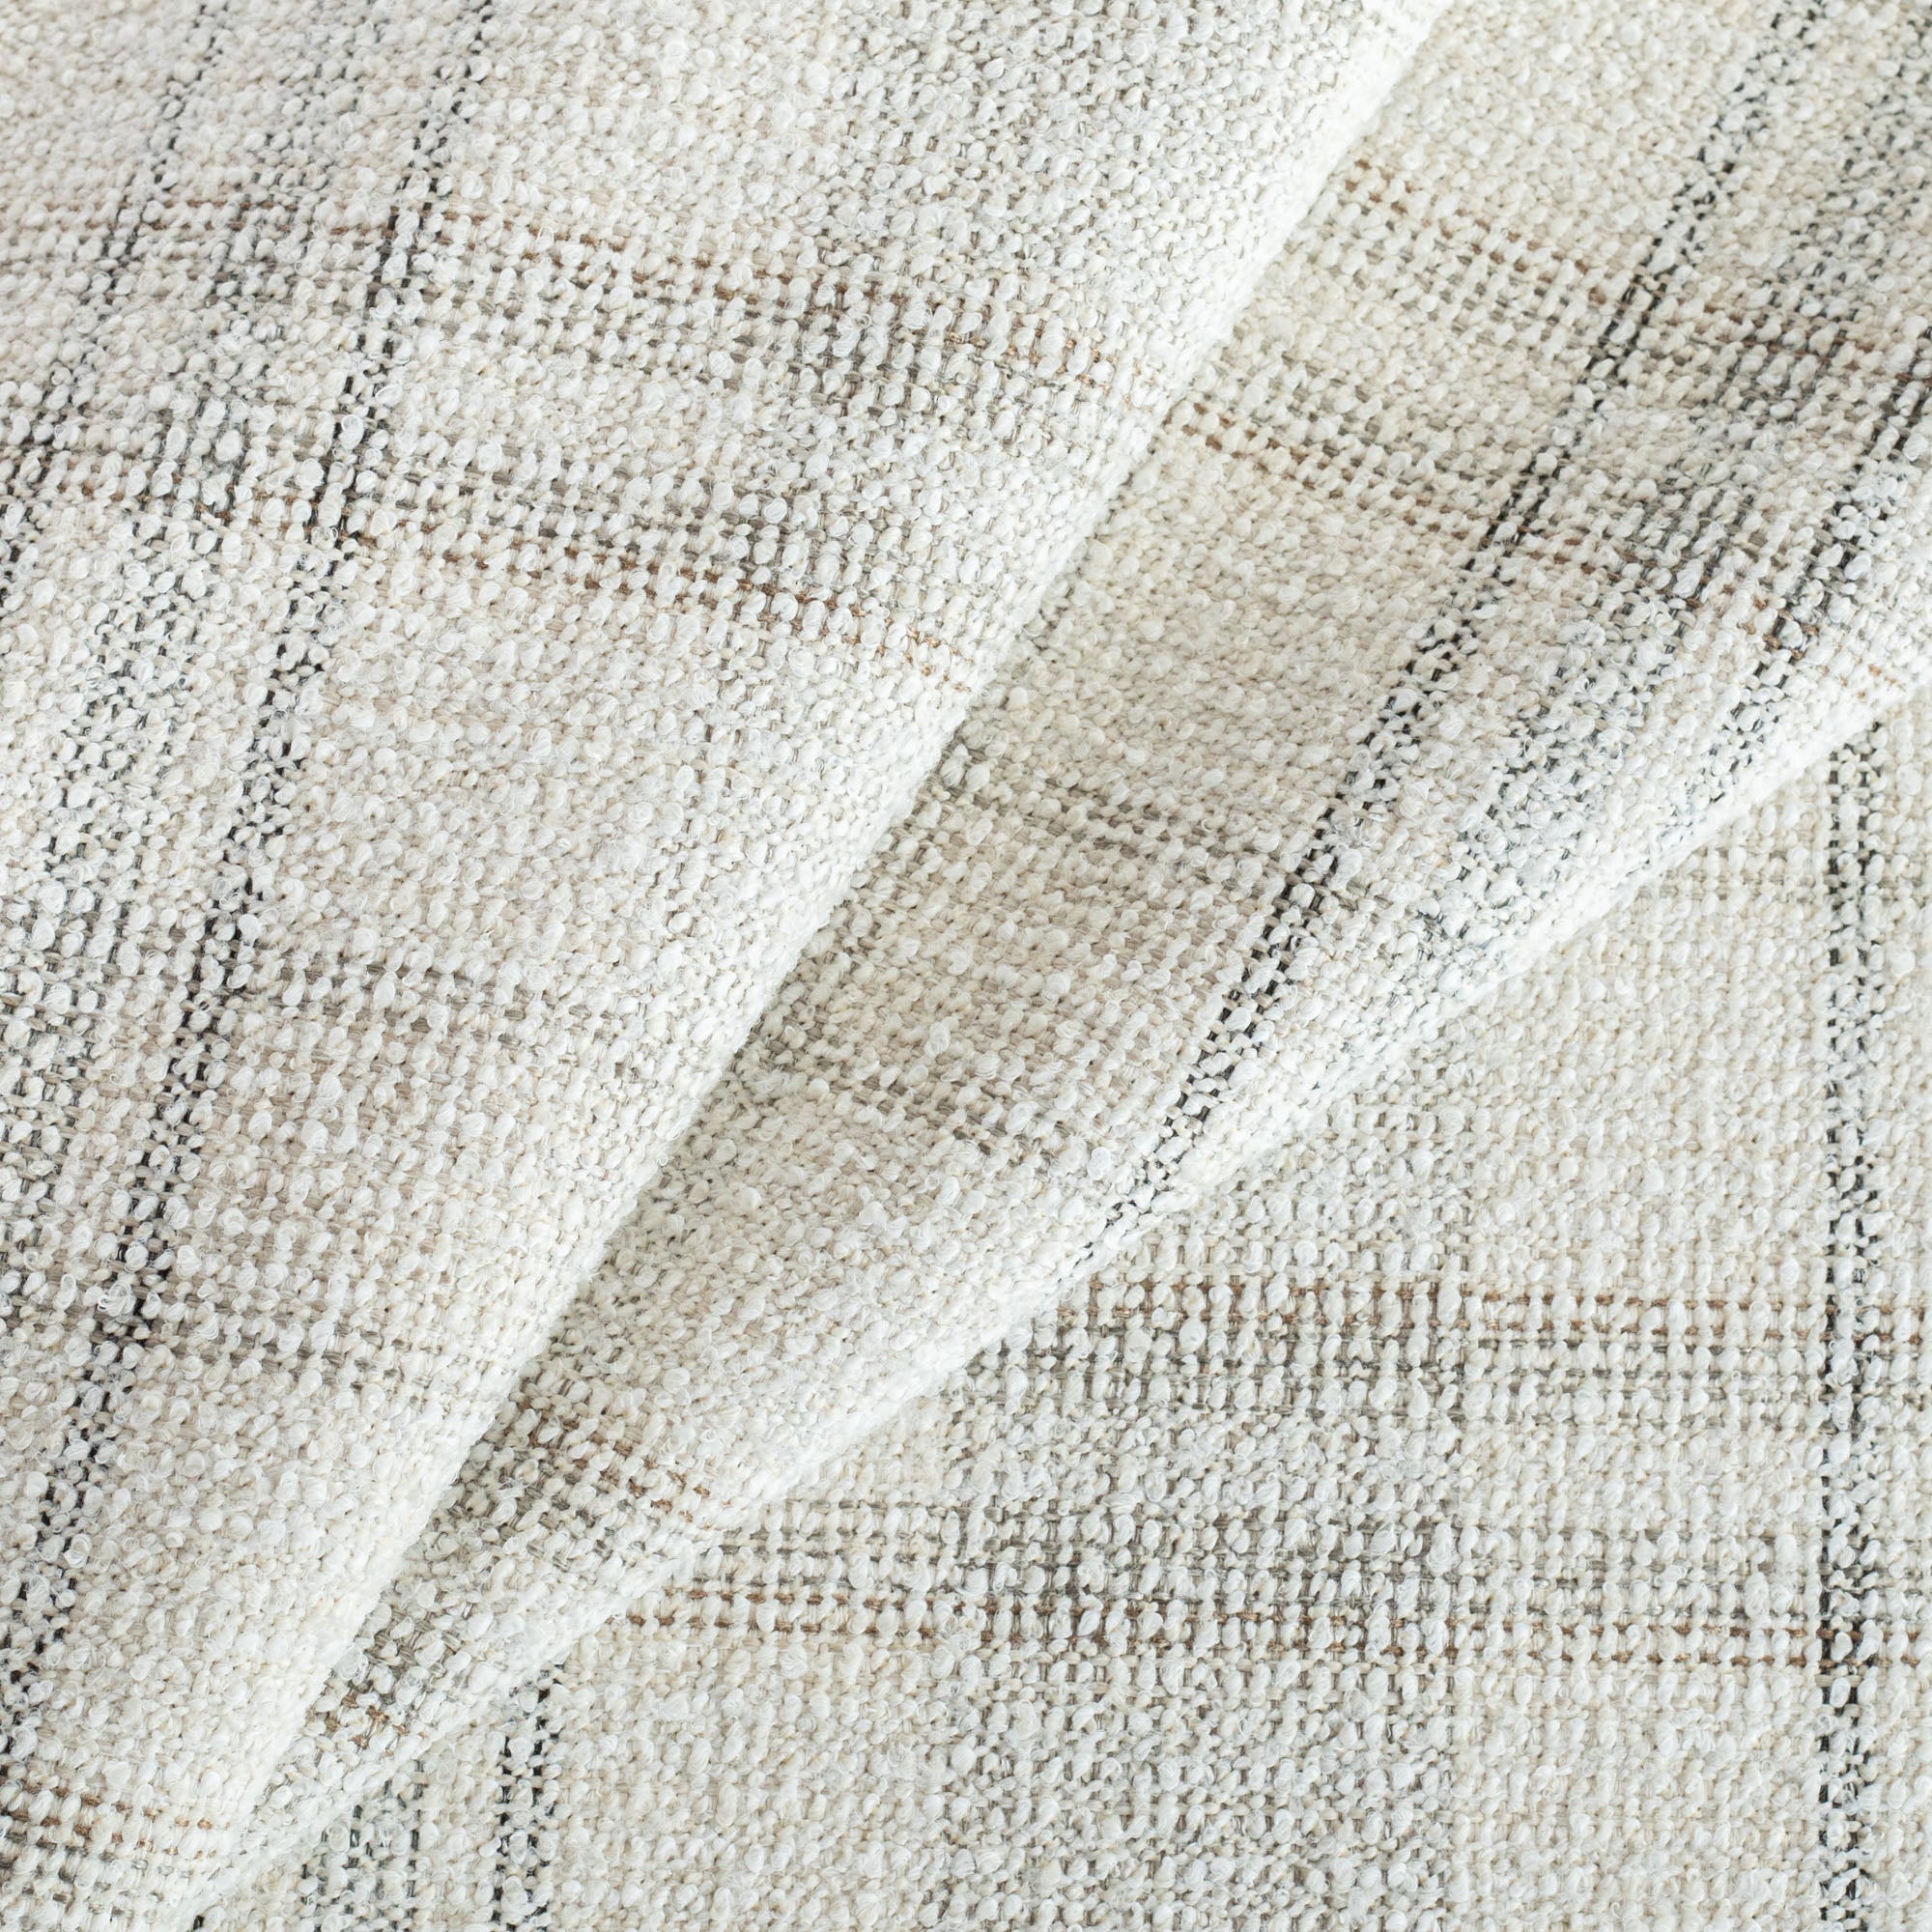 Hugo Plaid salt and pepper cream and grey high performance upholstery fabric from Tonic Living